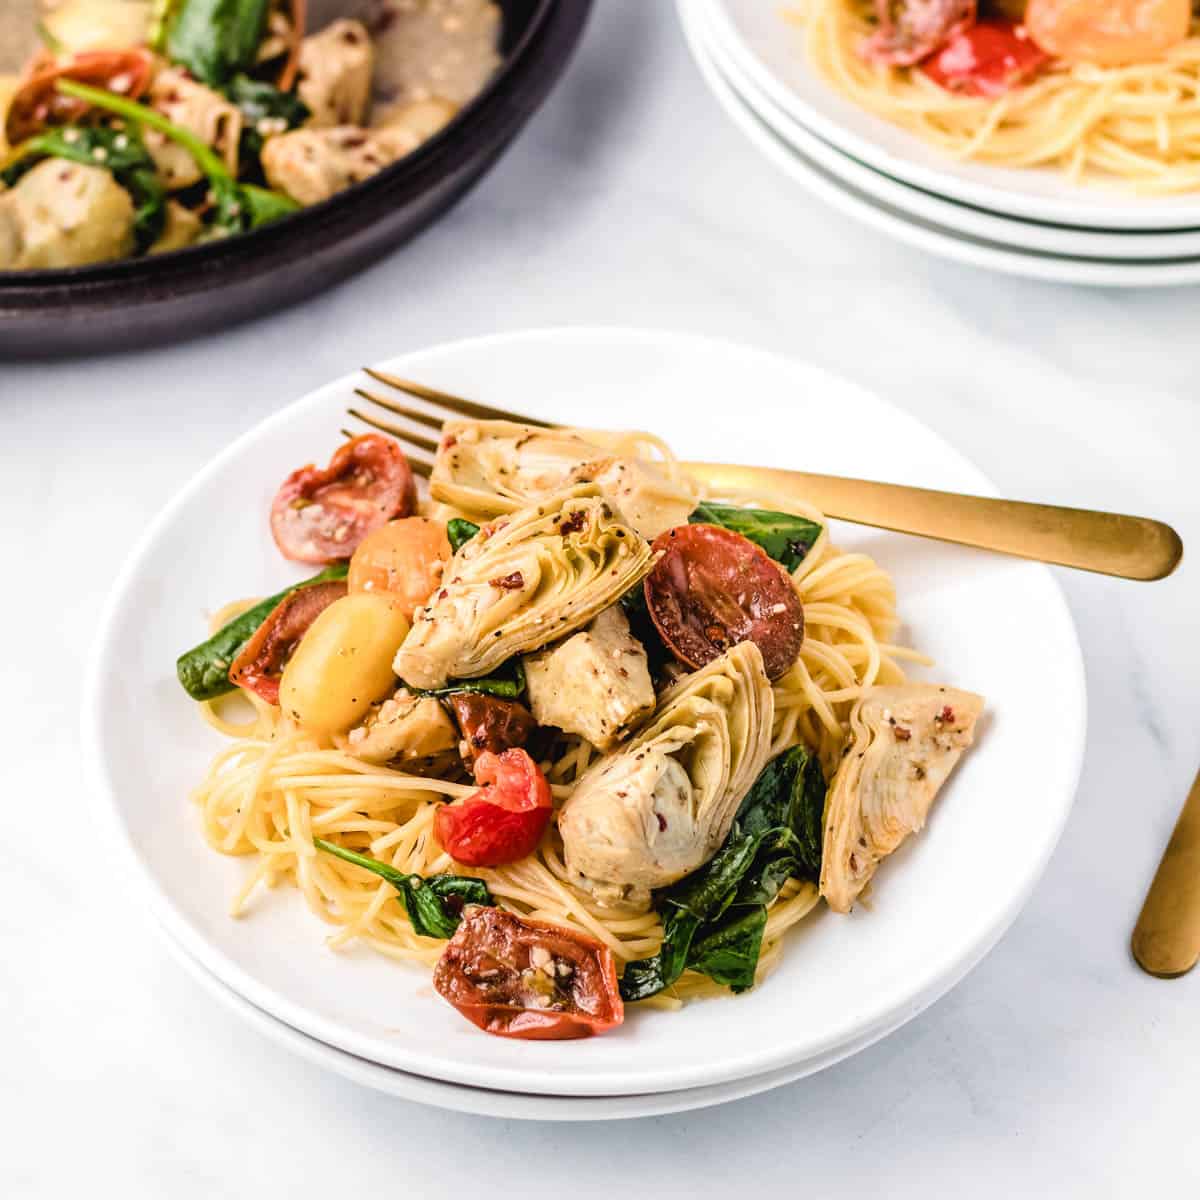 A plate of pasta with Italian artichoke hearts, cherry tomatoes, and spinach.